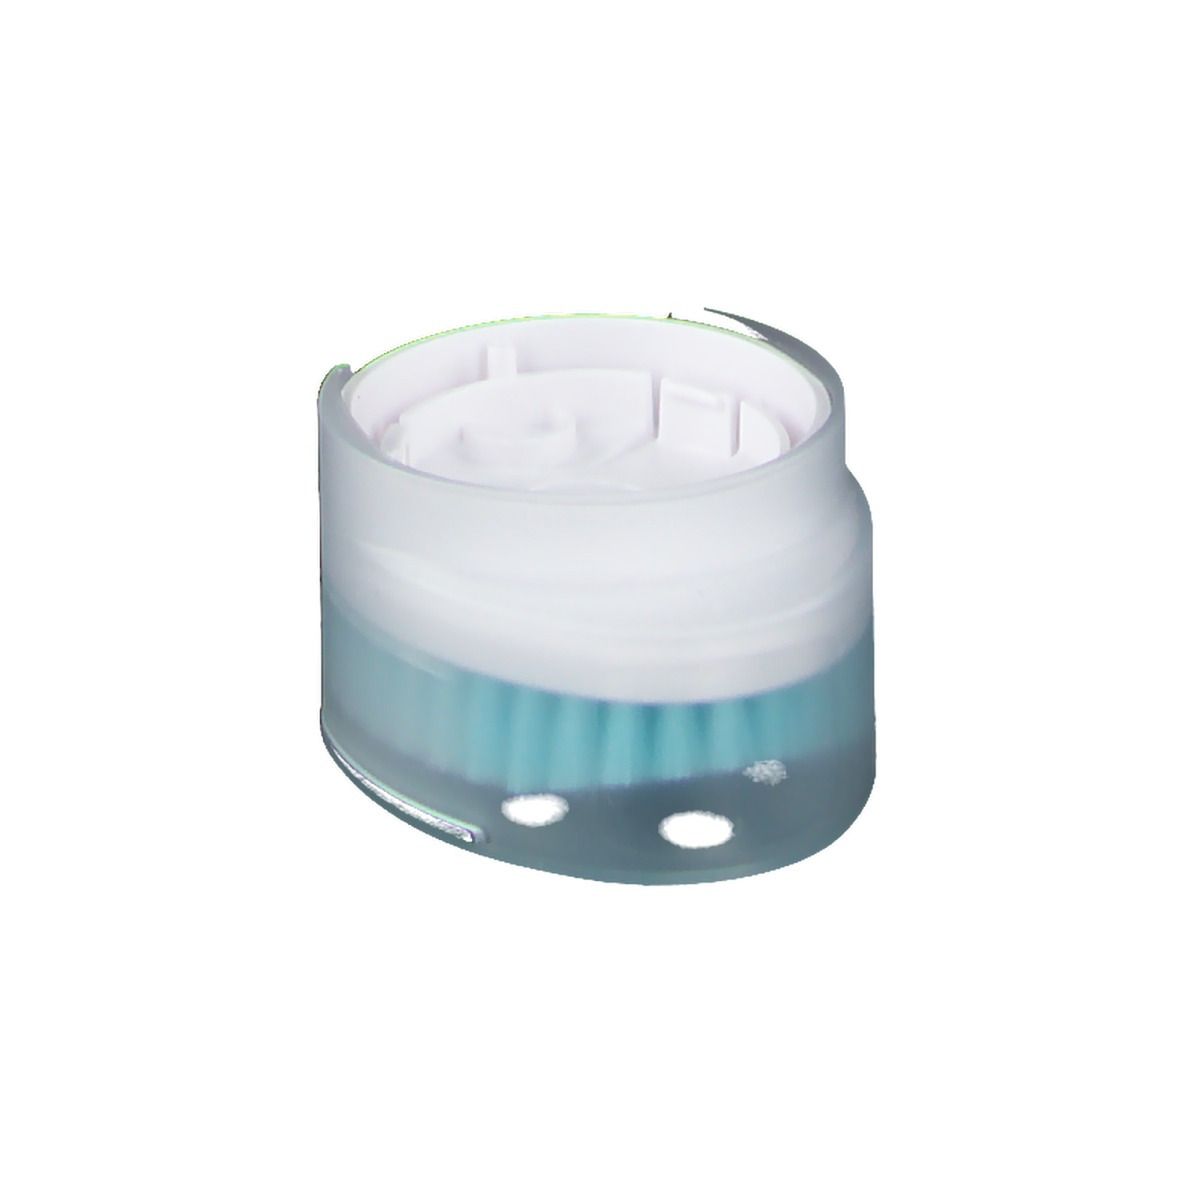 CLINIQUE Anti-Blemish Solutions Deep Cleansing Brush Head